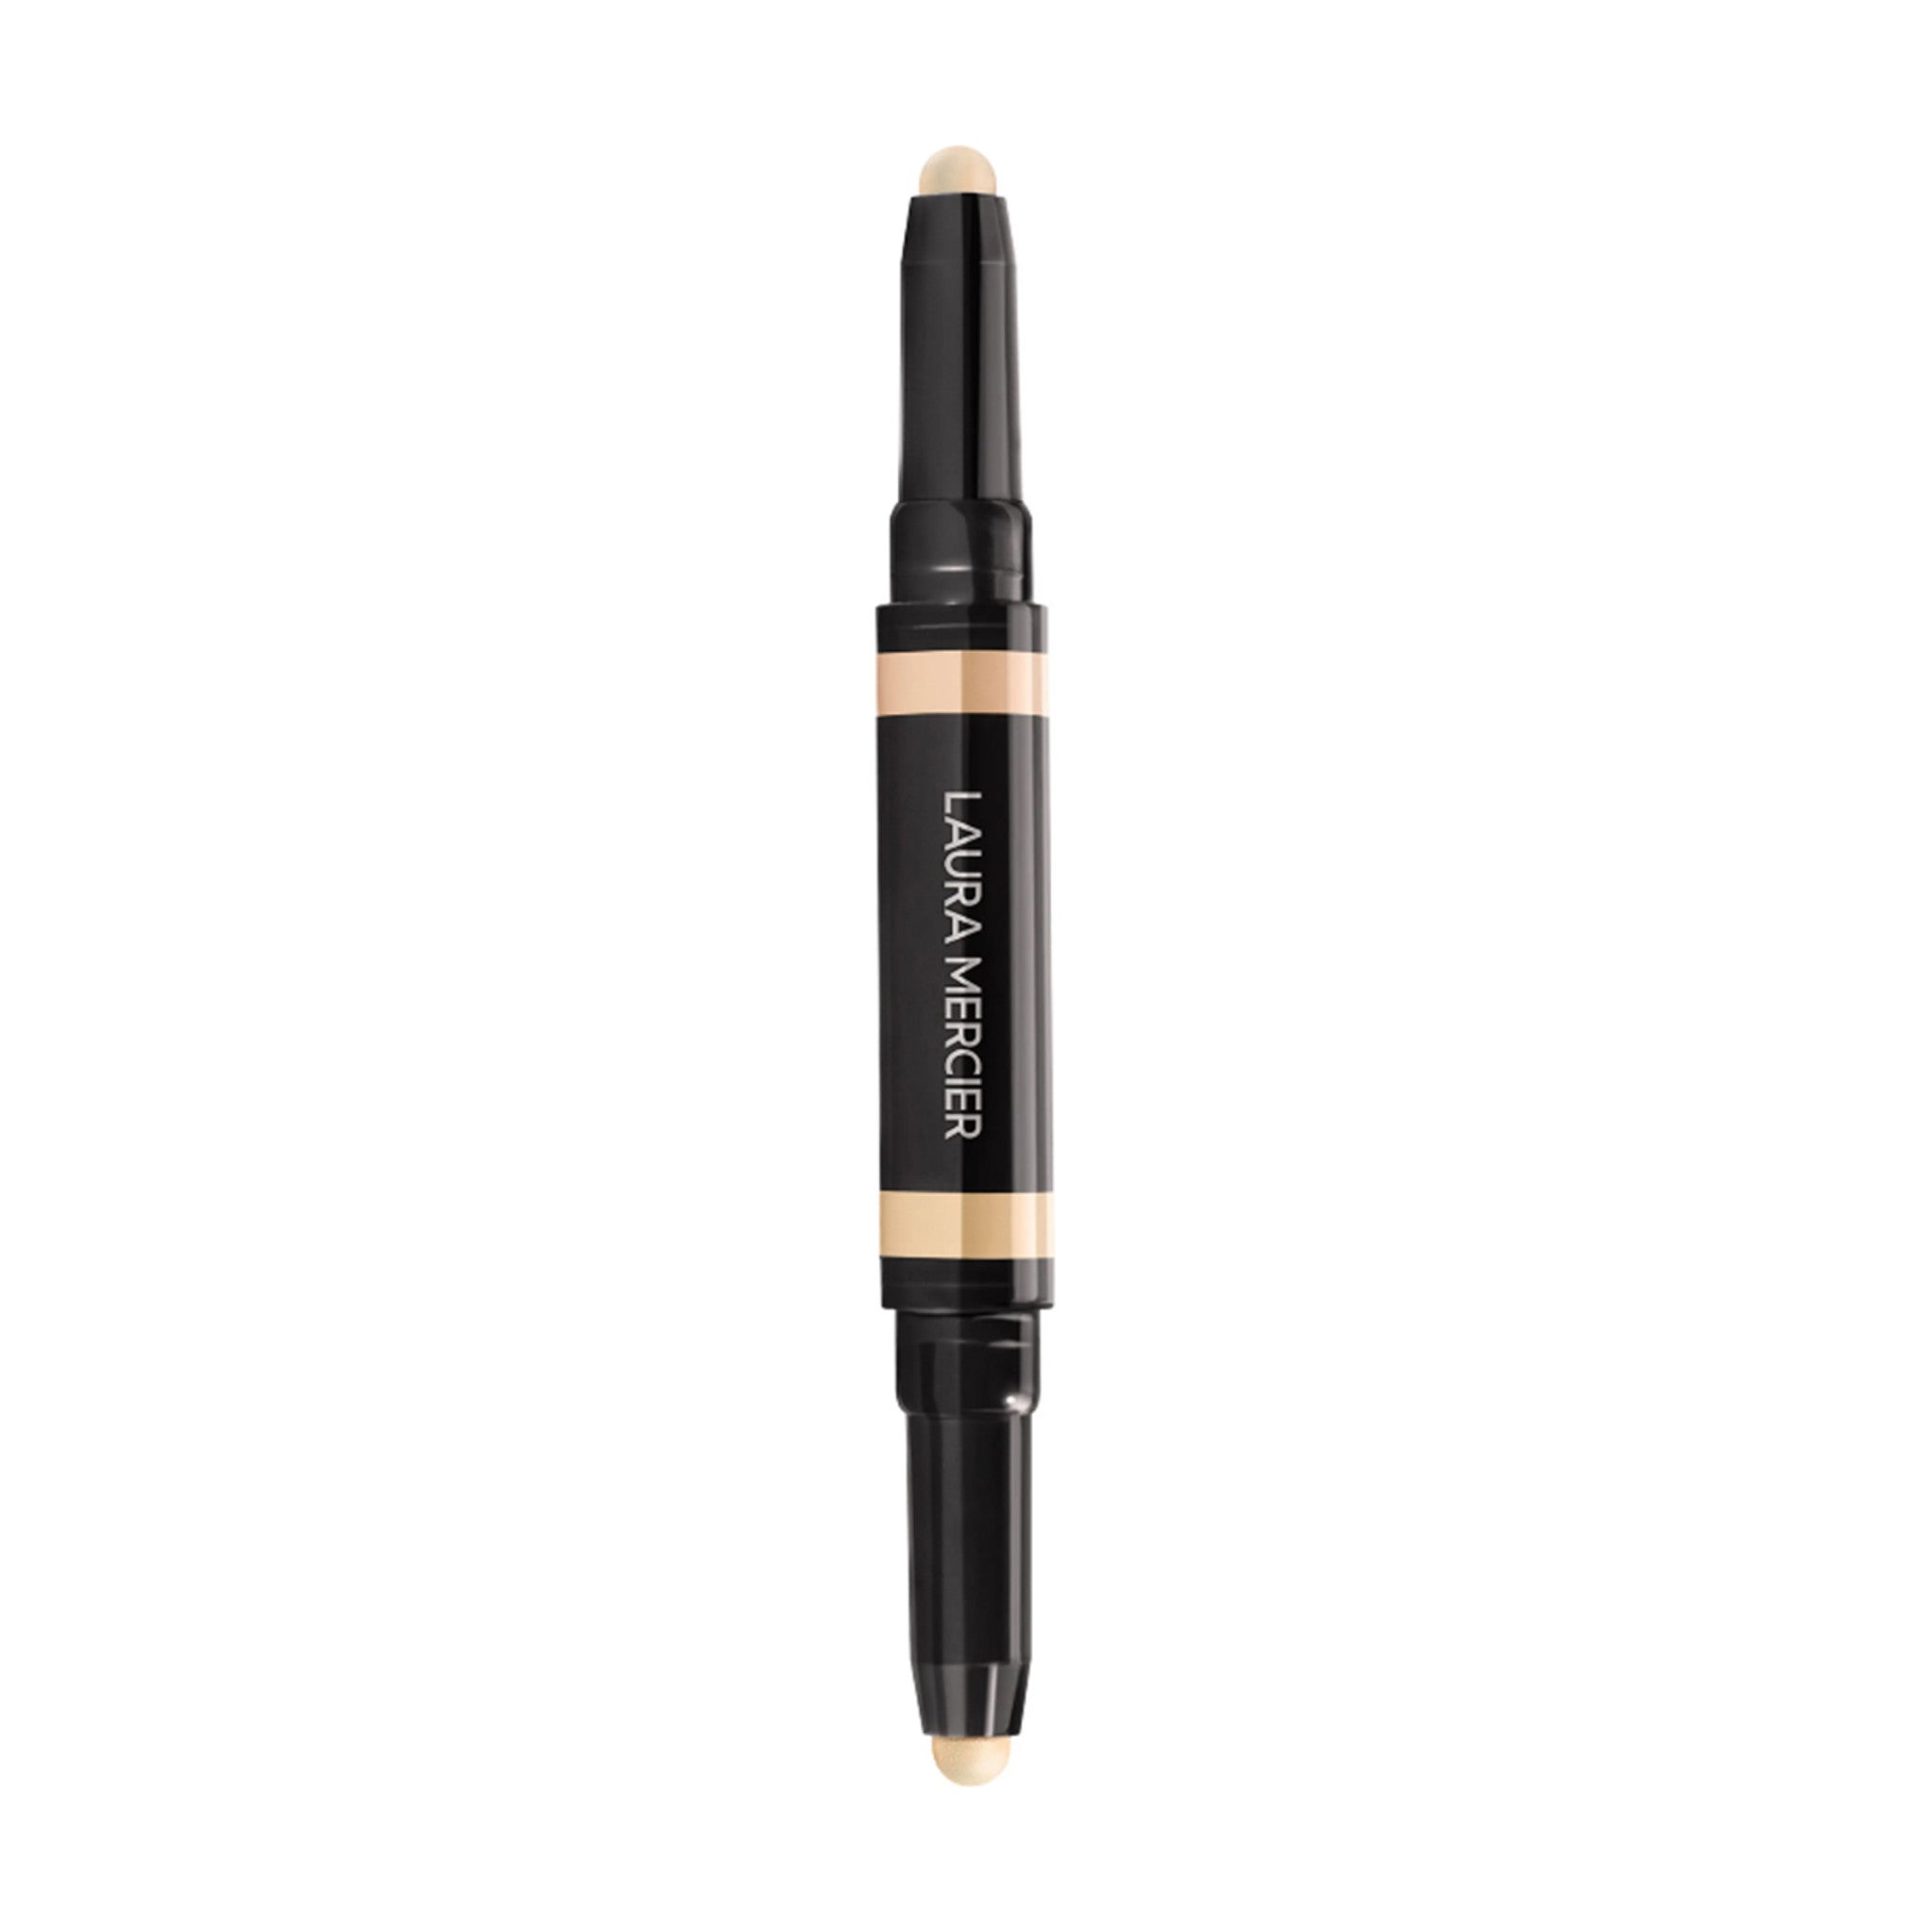 Laura Mercier Secret Camouflage Concealer Duo Stick Color/Shade variant: 0.5N main image. This product is for light warm complexions